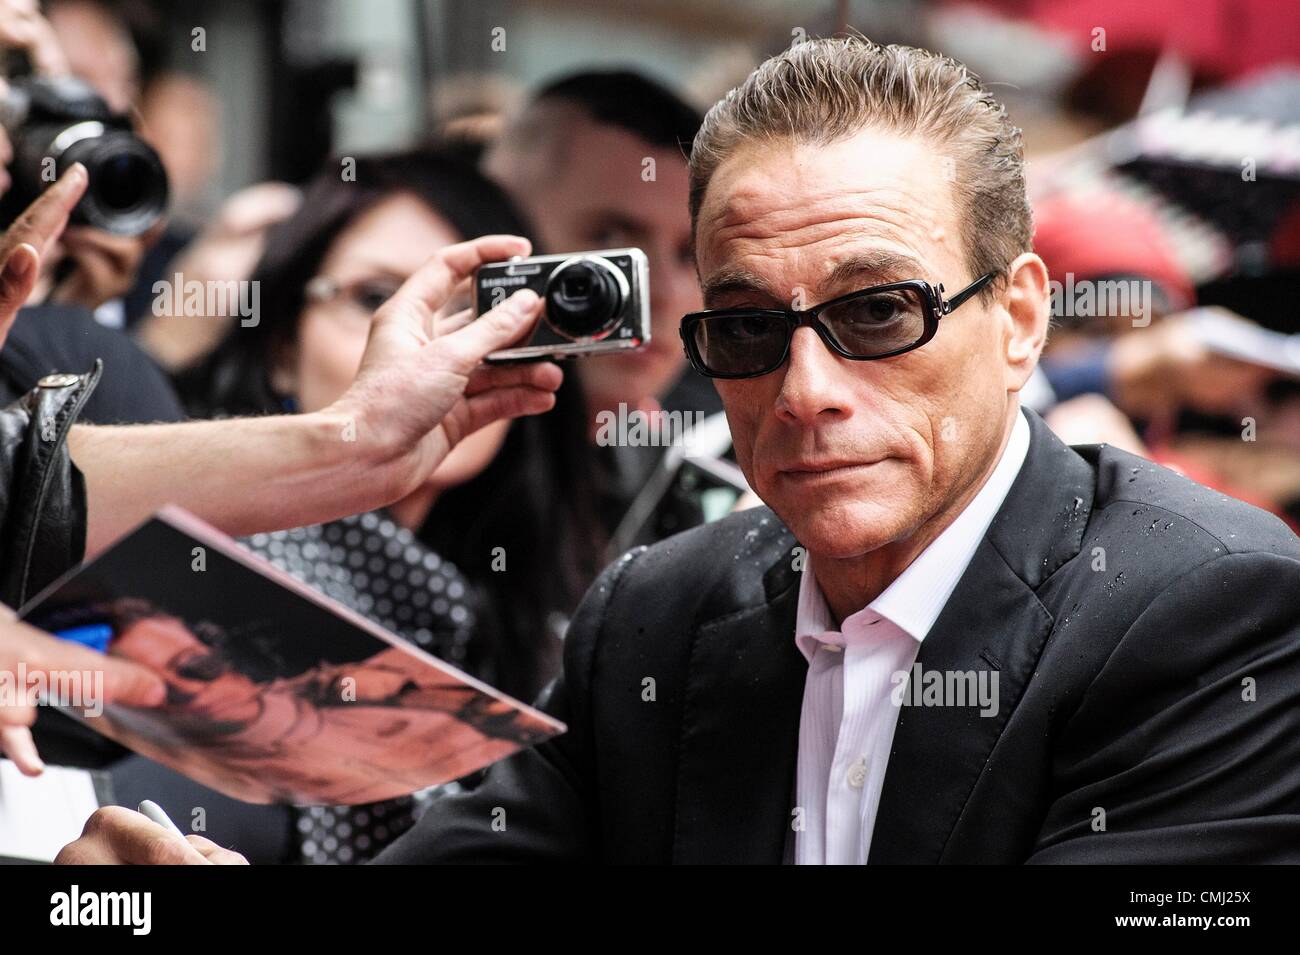 13th Aug 2012. Jean-Claude Van Damme attends UK Premiere of the film Expendables 2 on 13/08/2012 at The Empire Leicester Square, London. Persons pictured: Jean-Claude Van Damme . Picture by Julie Edward Credit:  JEP Celebrity Photos / Alamy Live News Stock Photo